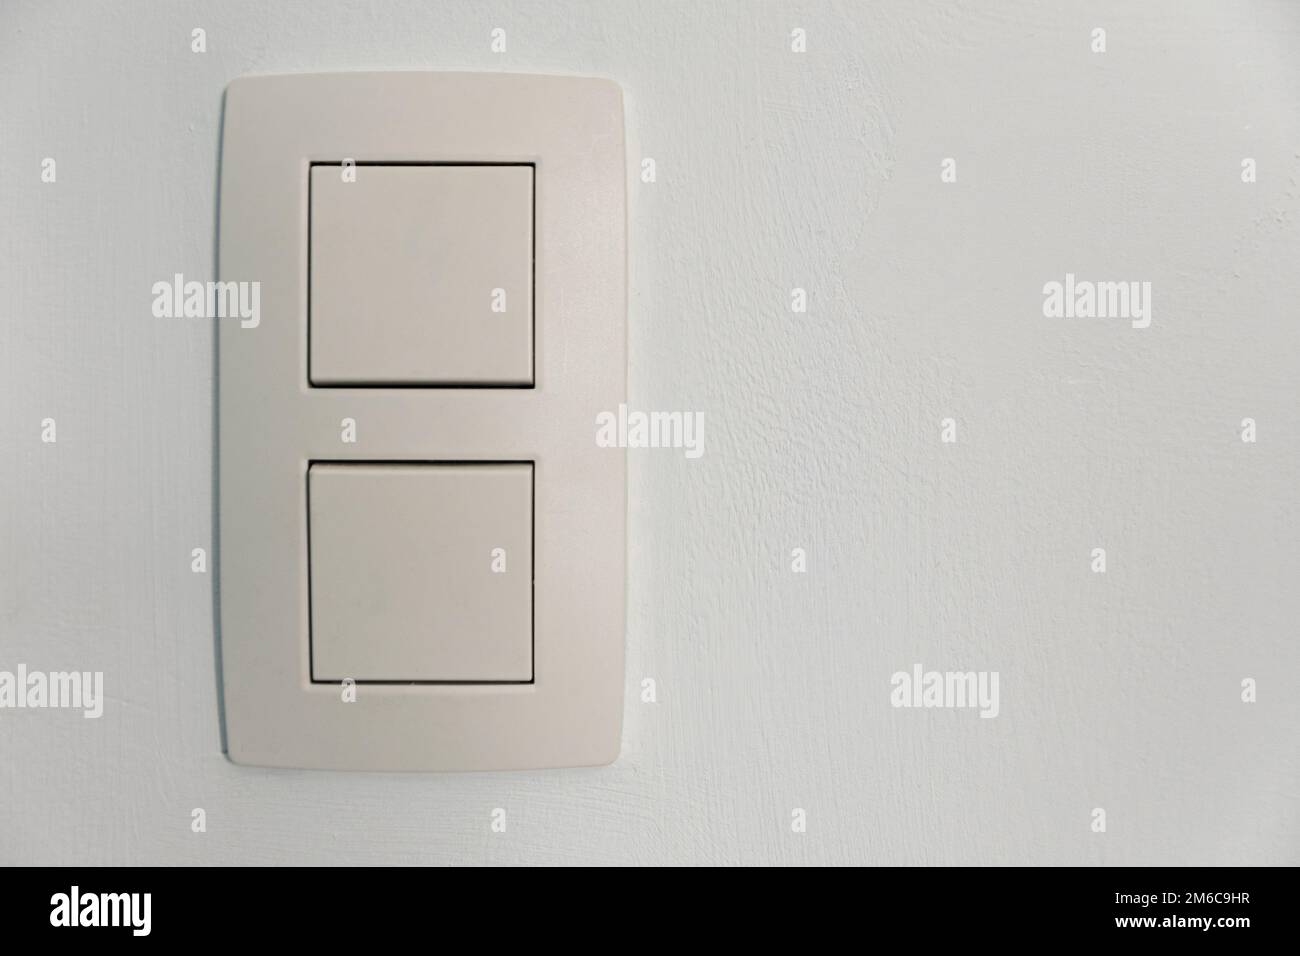 Standard double switch on a white wall, for use at home Stock Photo